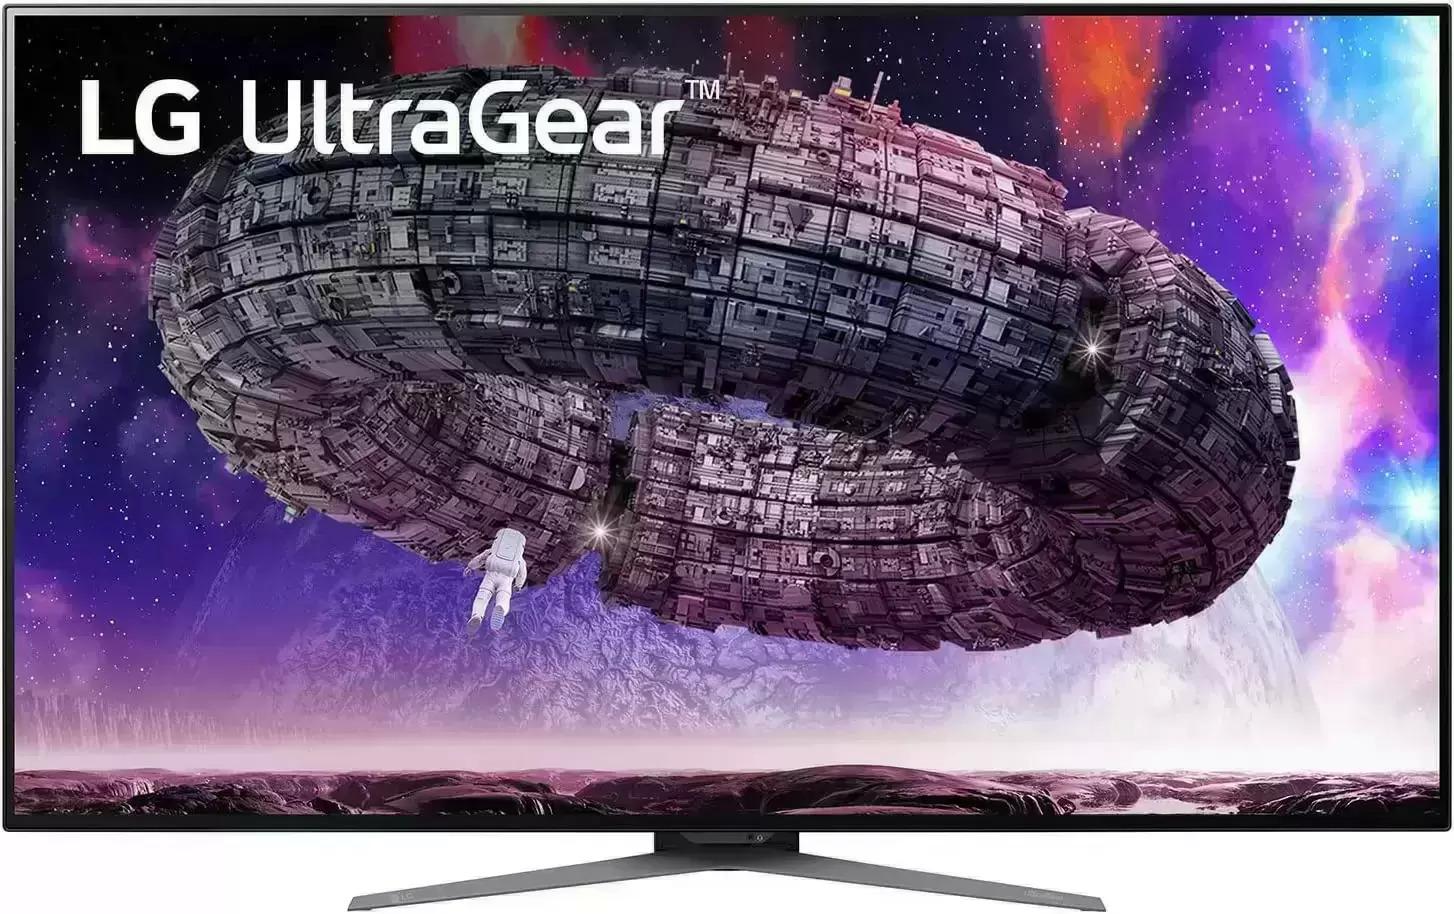 48in LG Ultragear 48GQ900 4K UDH 120Hz OLED Gaming Monitor for $896.99 Shipped